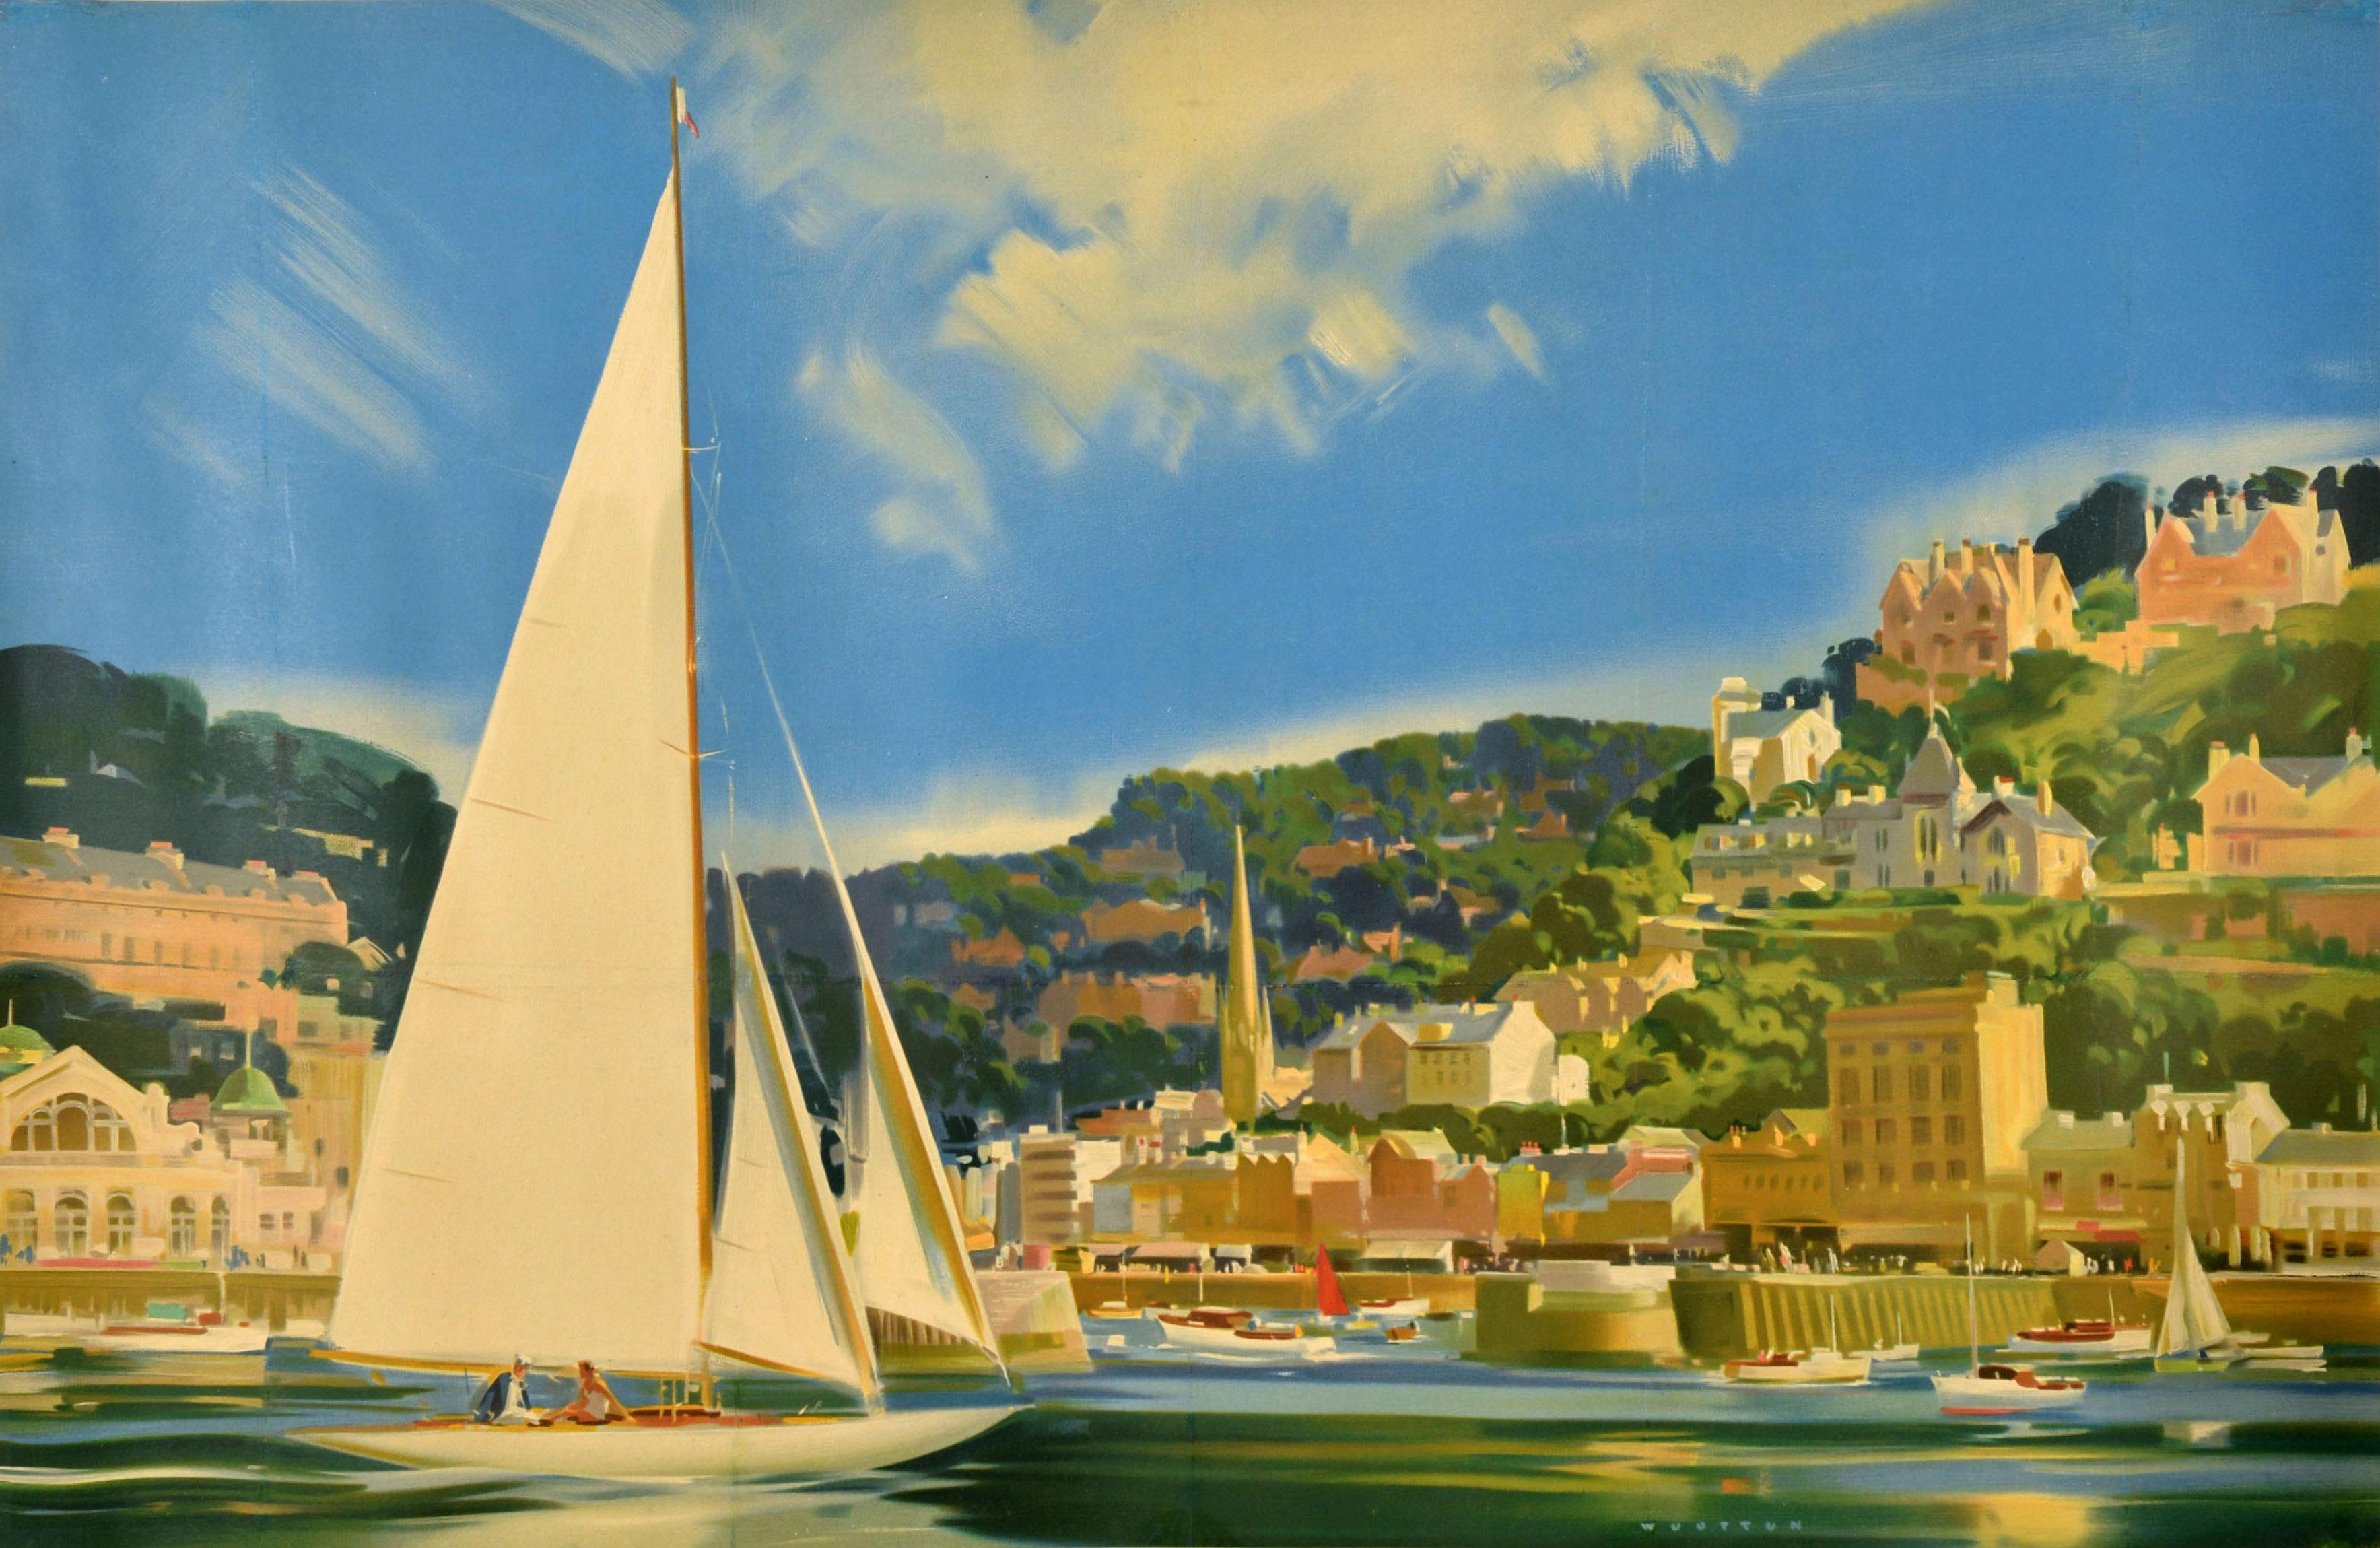 Original vintage British Railways poster for the seaside town of Torquay in Glorious Devon featuring stunning artwork by the notable British painter and illustrator Frank Wootton (1911-1998) depicting a colourful sunny view of people on a sailing